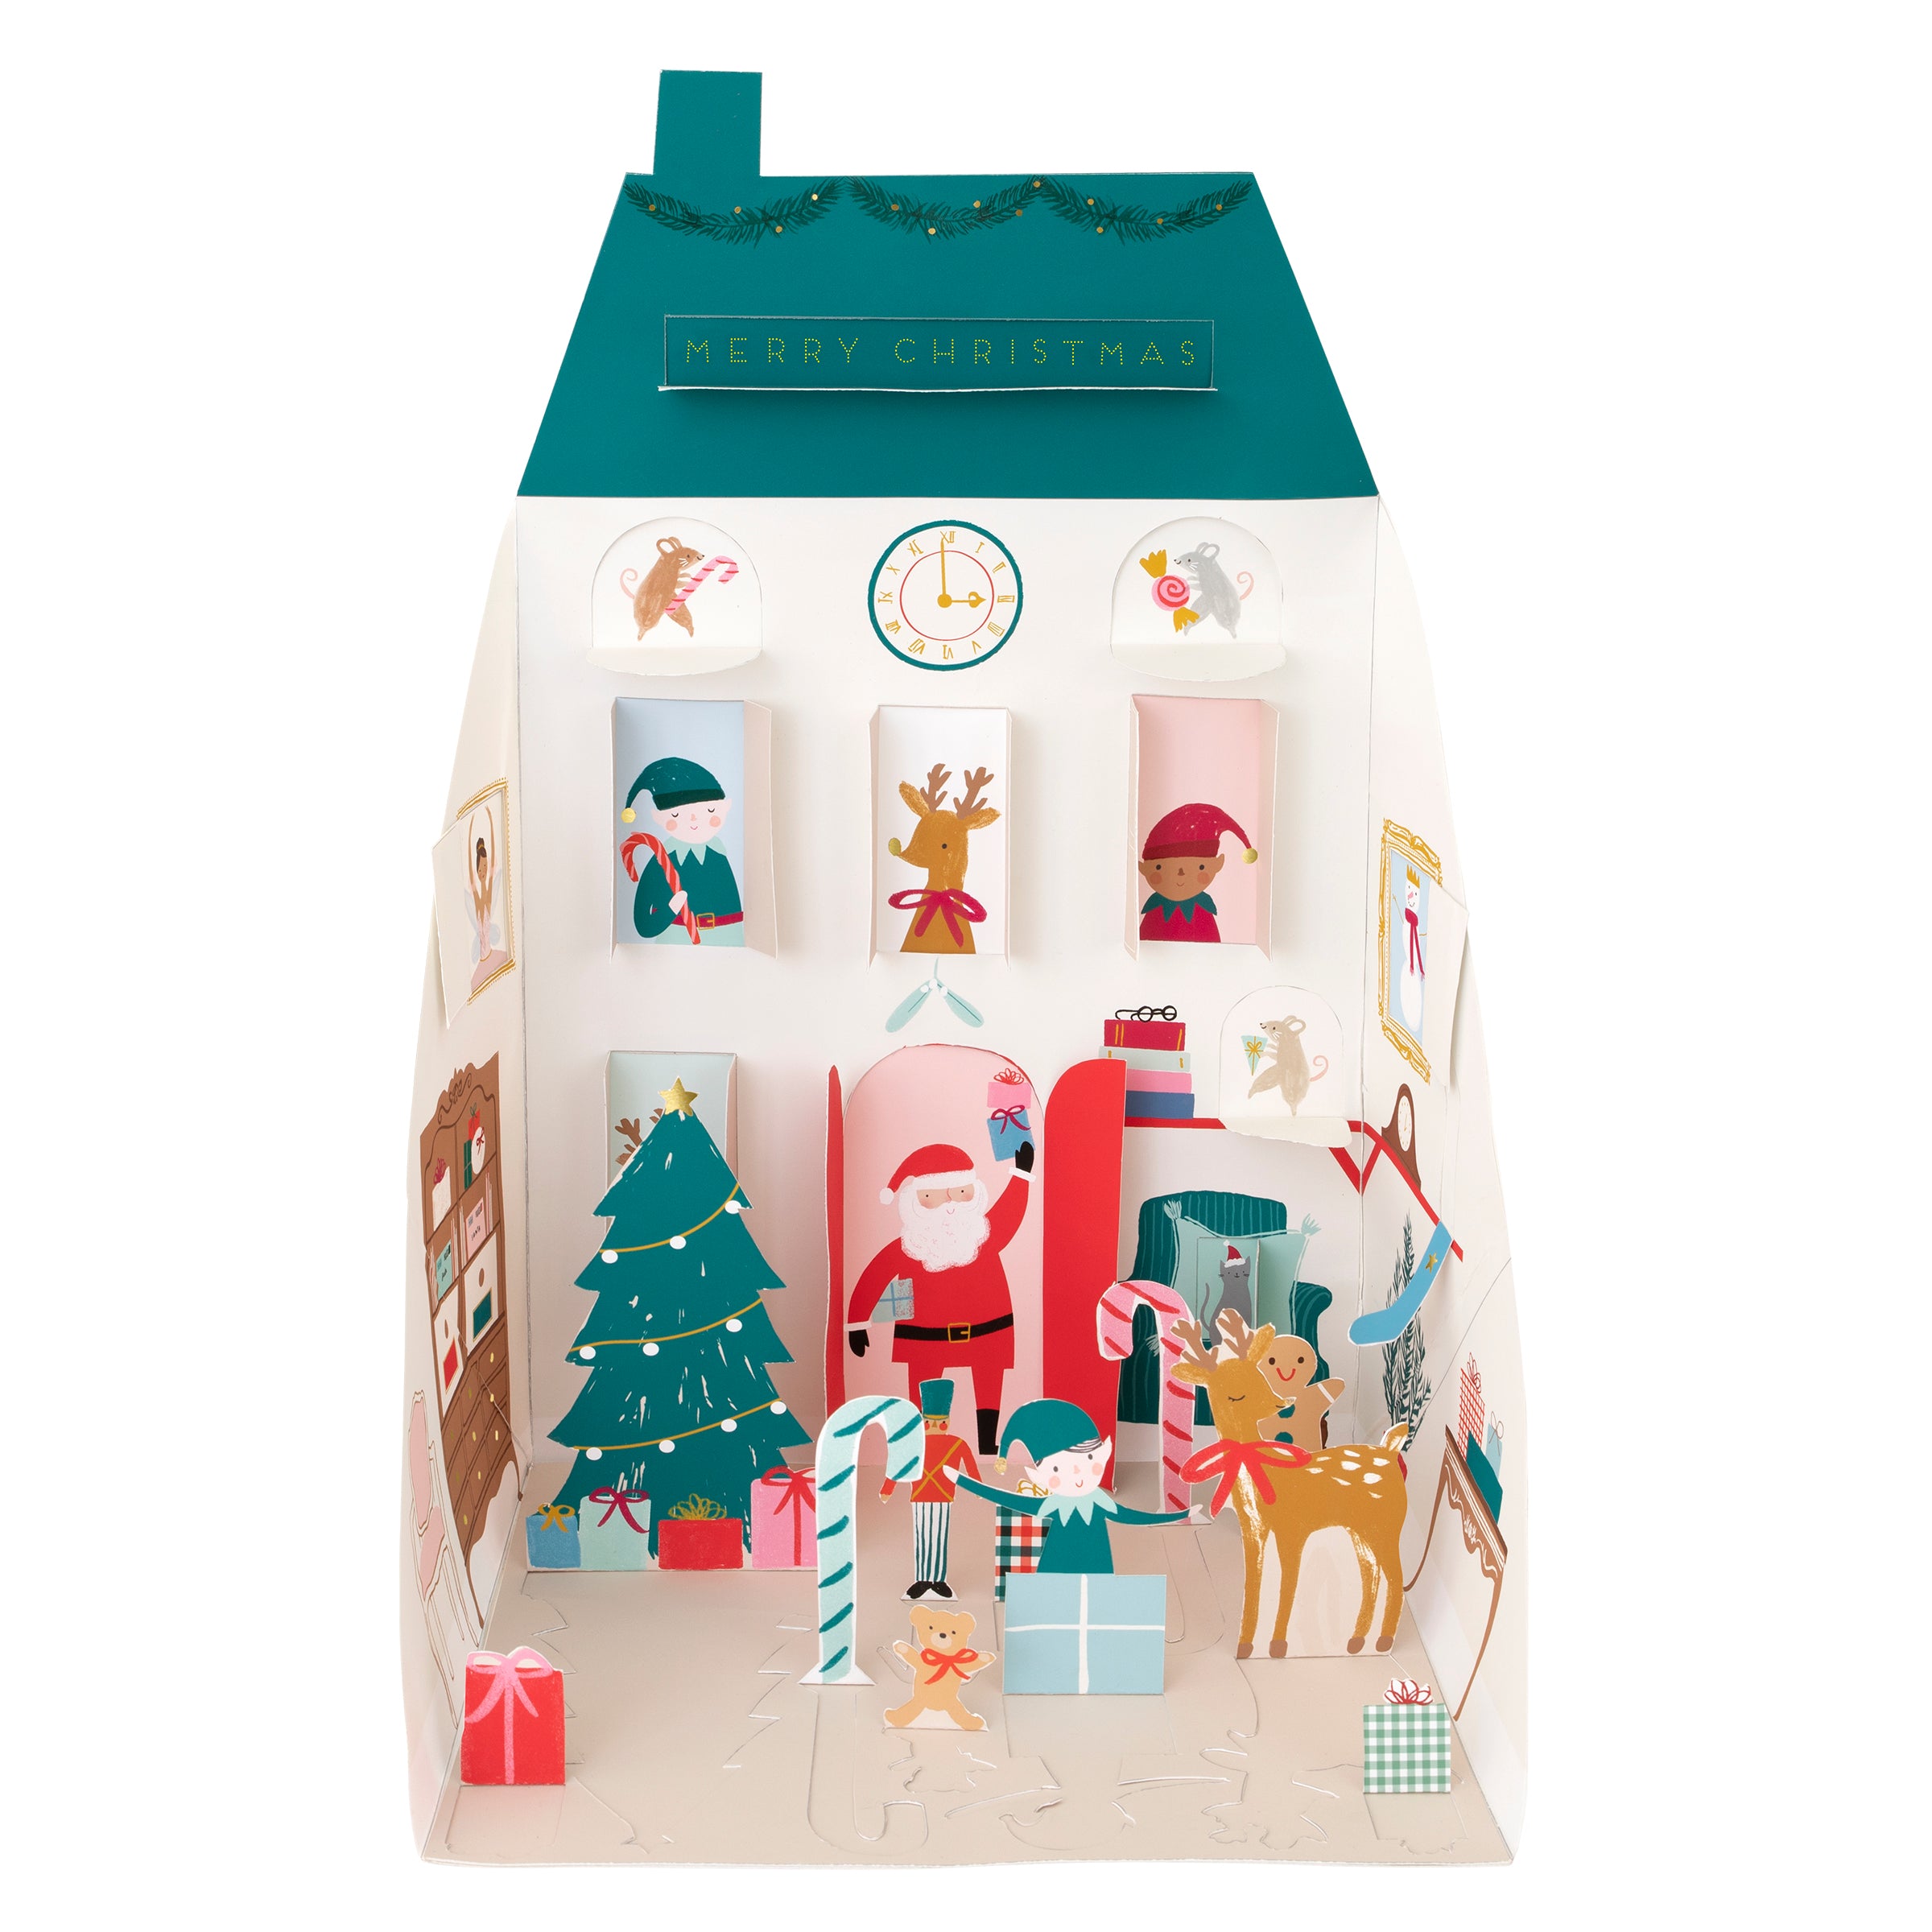 This paper doll house is designed as Santa's home, complete with his reindeer, elves, Christmas tree and gifts.